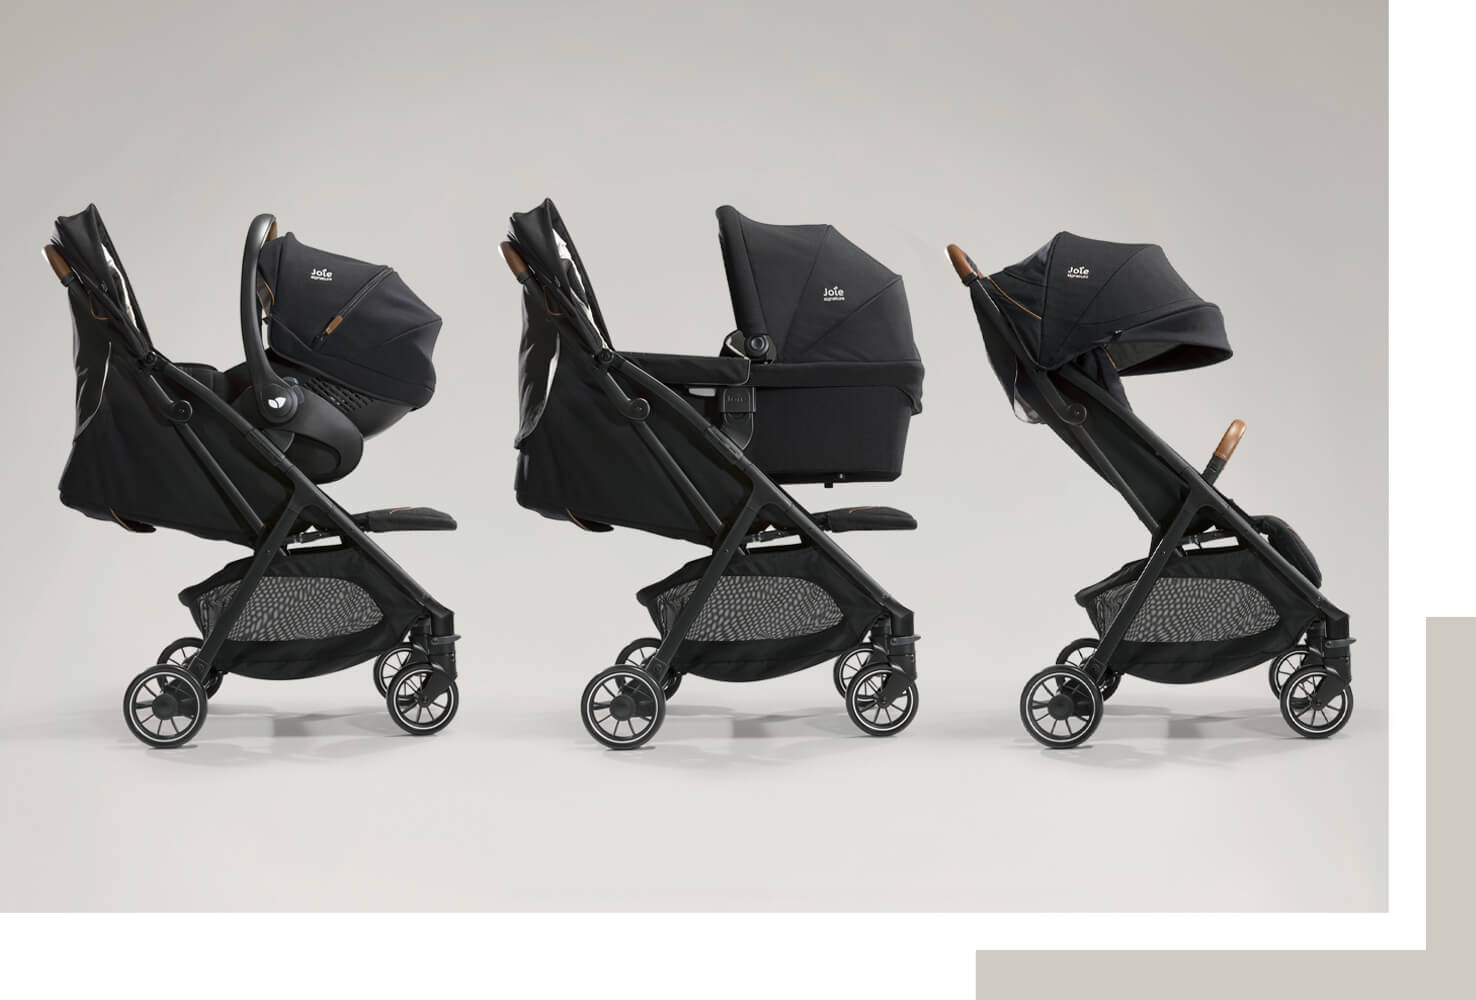 A model pushing the Joie Parcel pushchair in 3 different modes: with carry cot, infant car seat, and pushchair seat